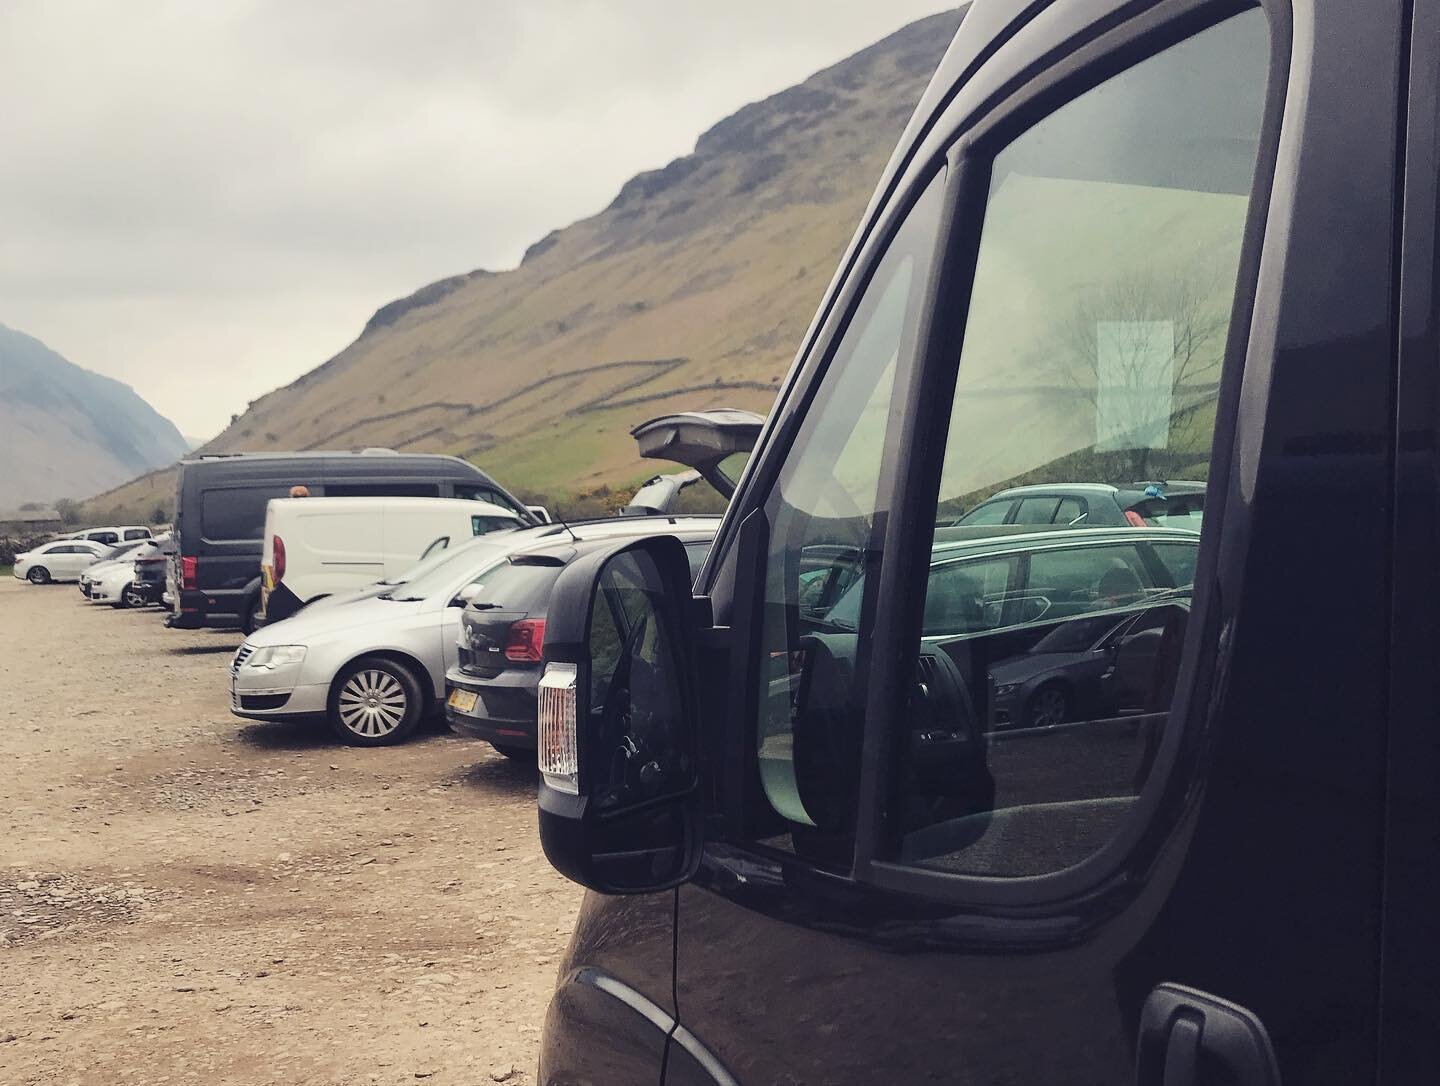 🚍 Room with a view 🚍 #lakedistrict #wasdale #scafellpike #campervanhire #campervan